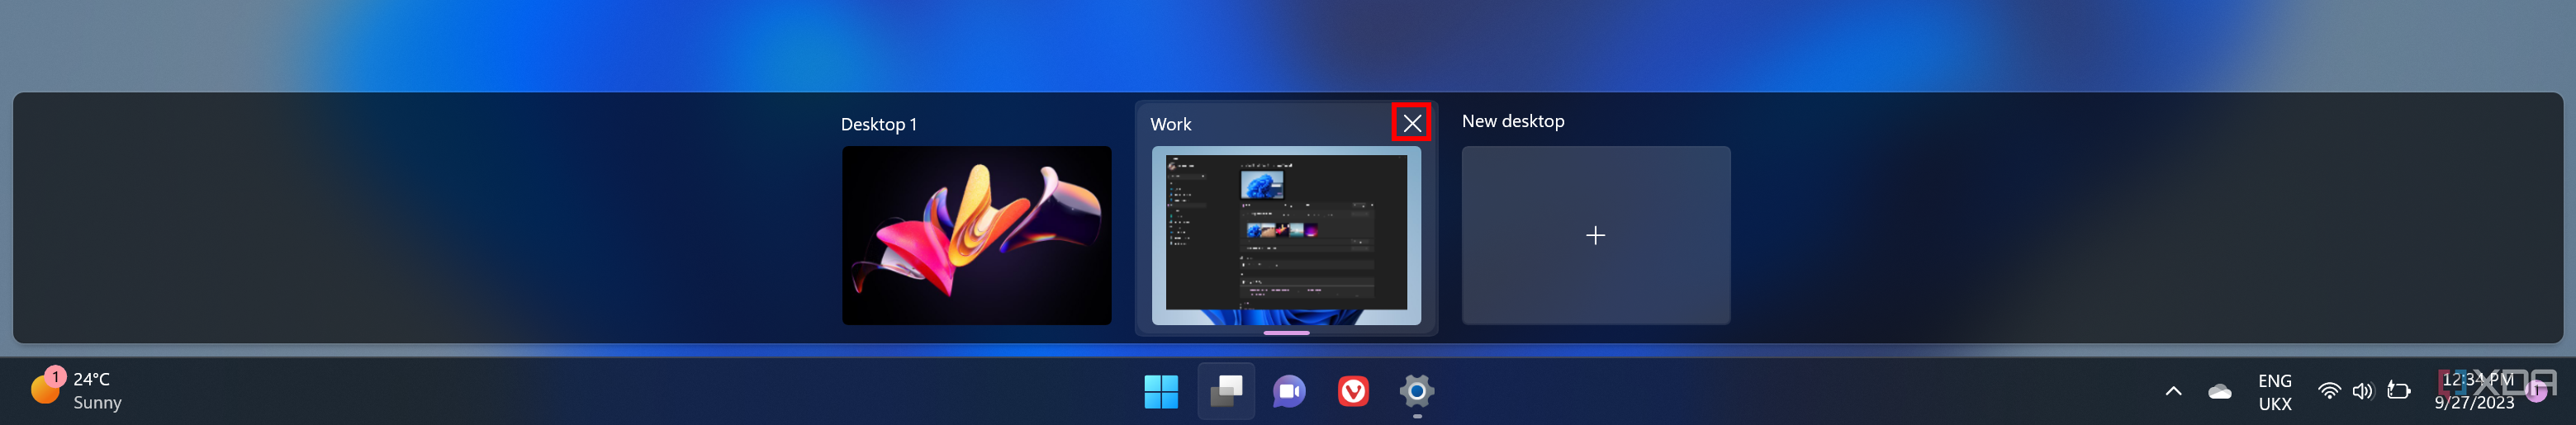 Screenshot of virtual desktops on Windows 11 with the remove button highlighted for one of the desktops